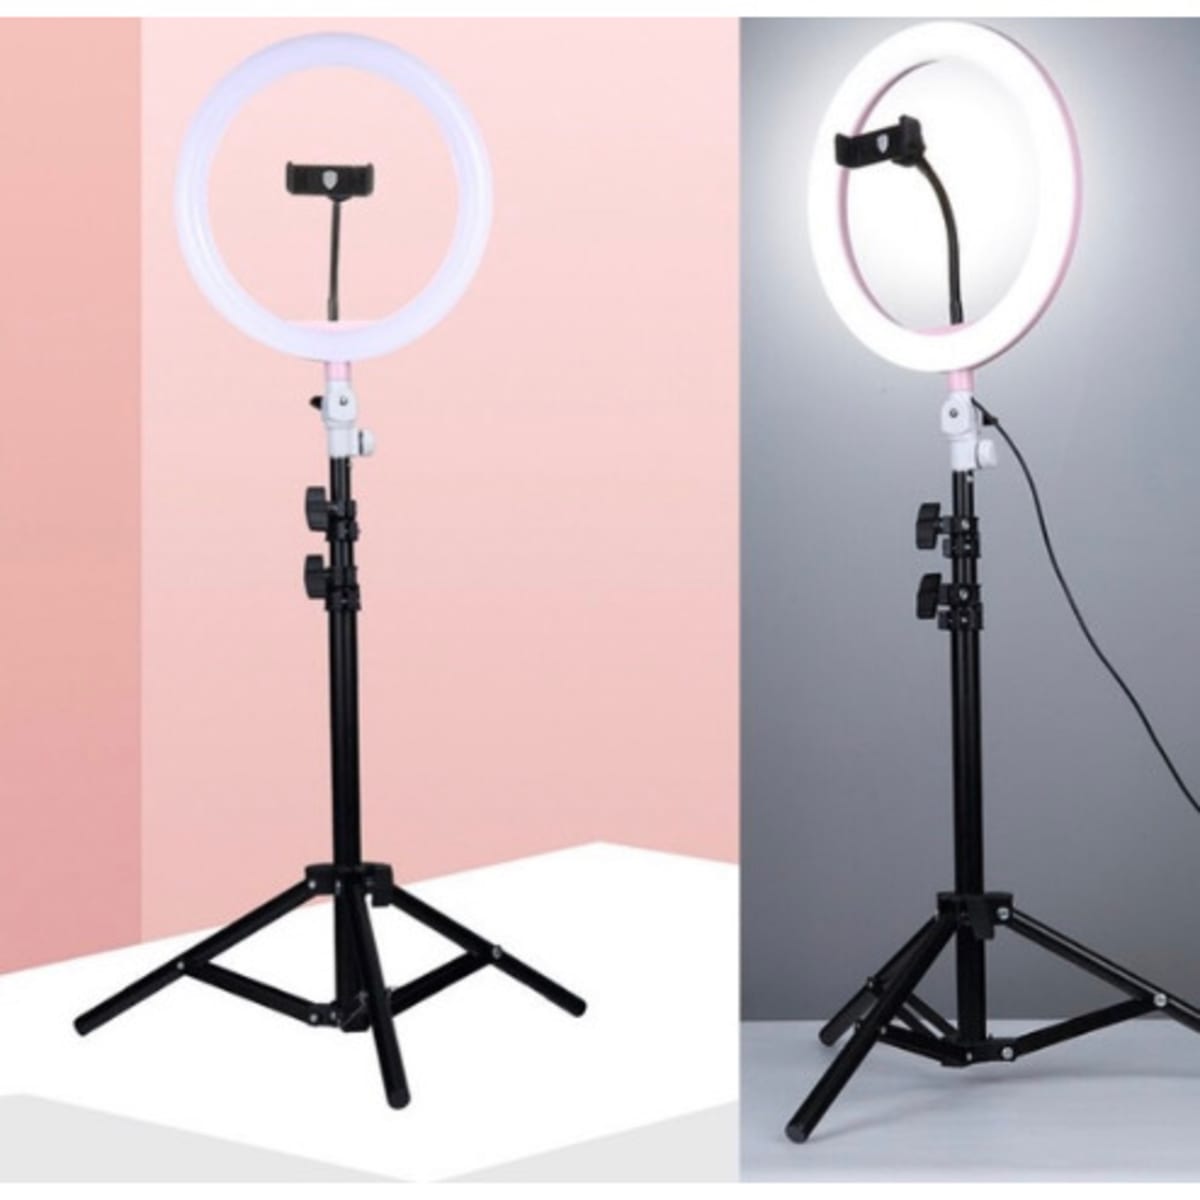 What is a Ring Light?